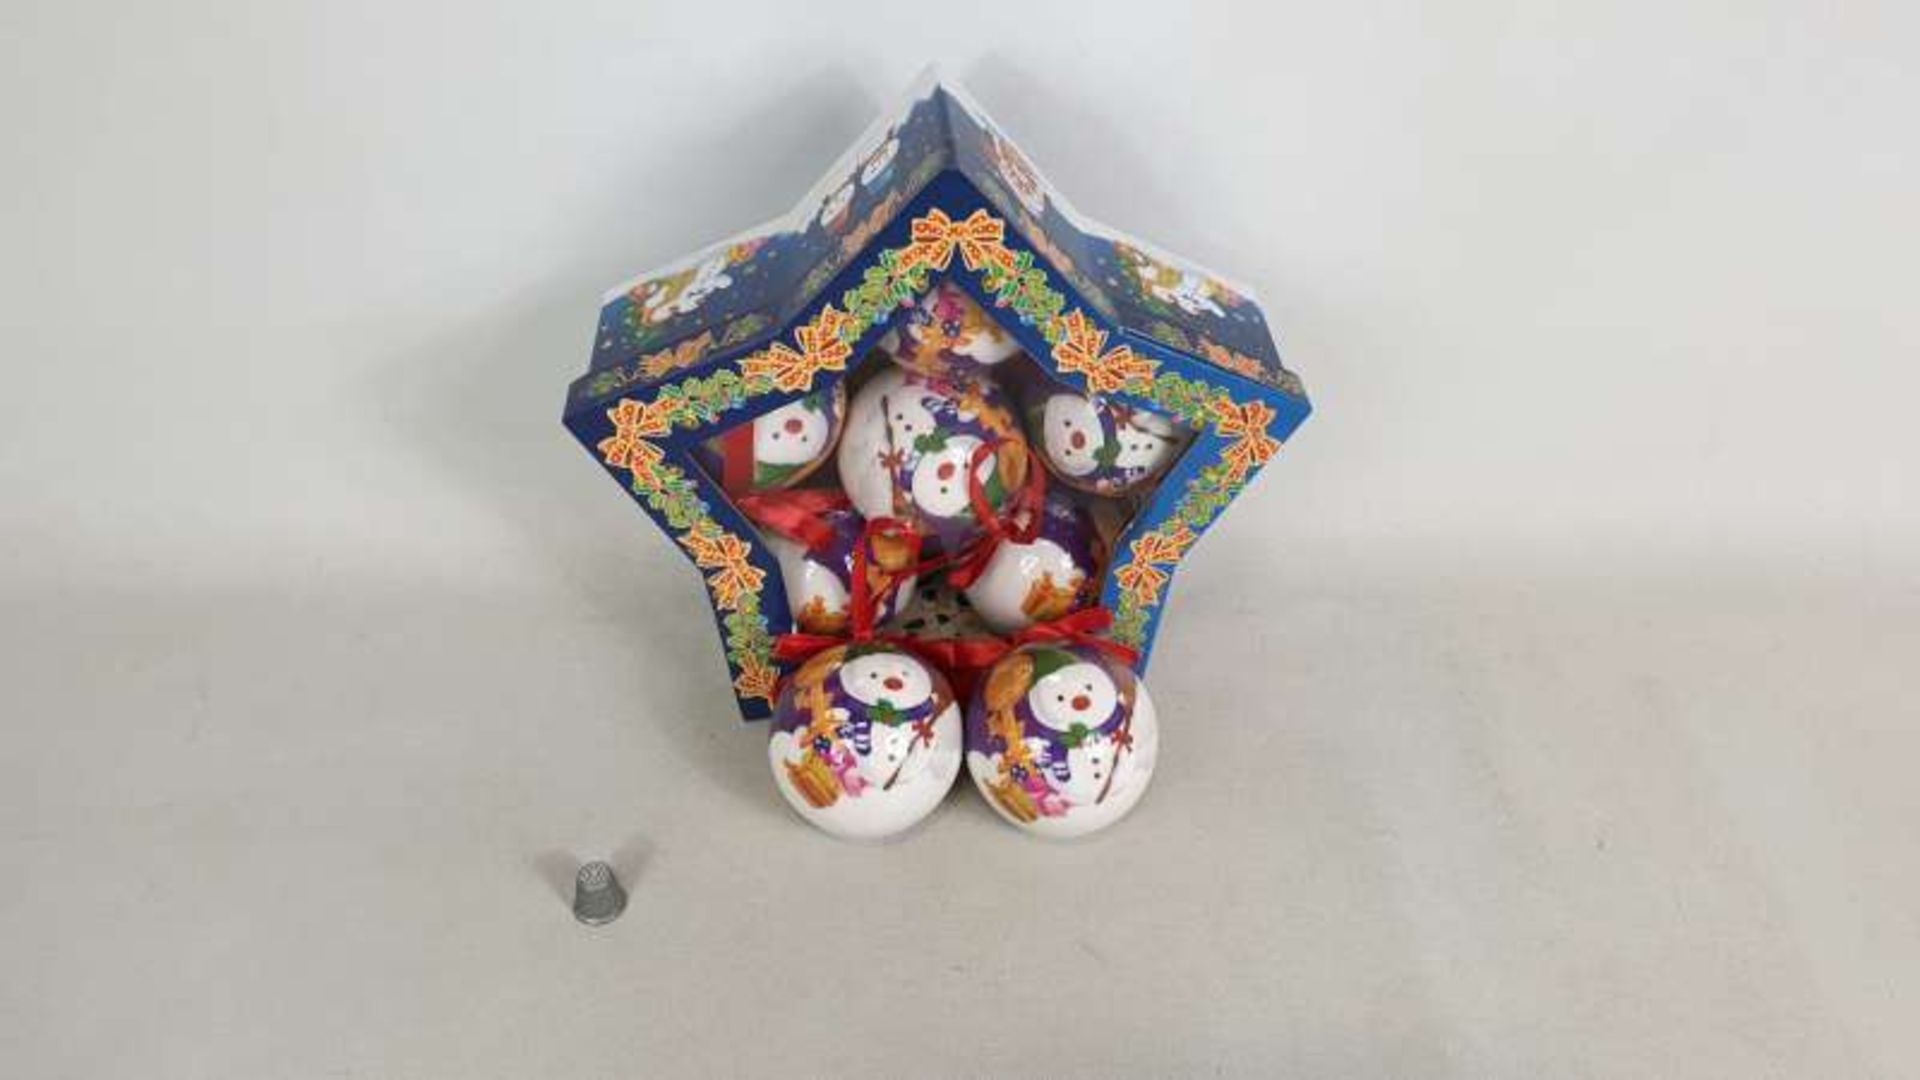 48 X SNOWMAN CHRISTMAS BAUBLES IN DECORATIVE STAR BOX IN 3 BOXES